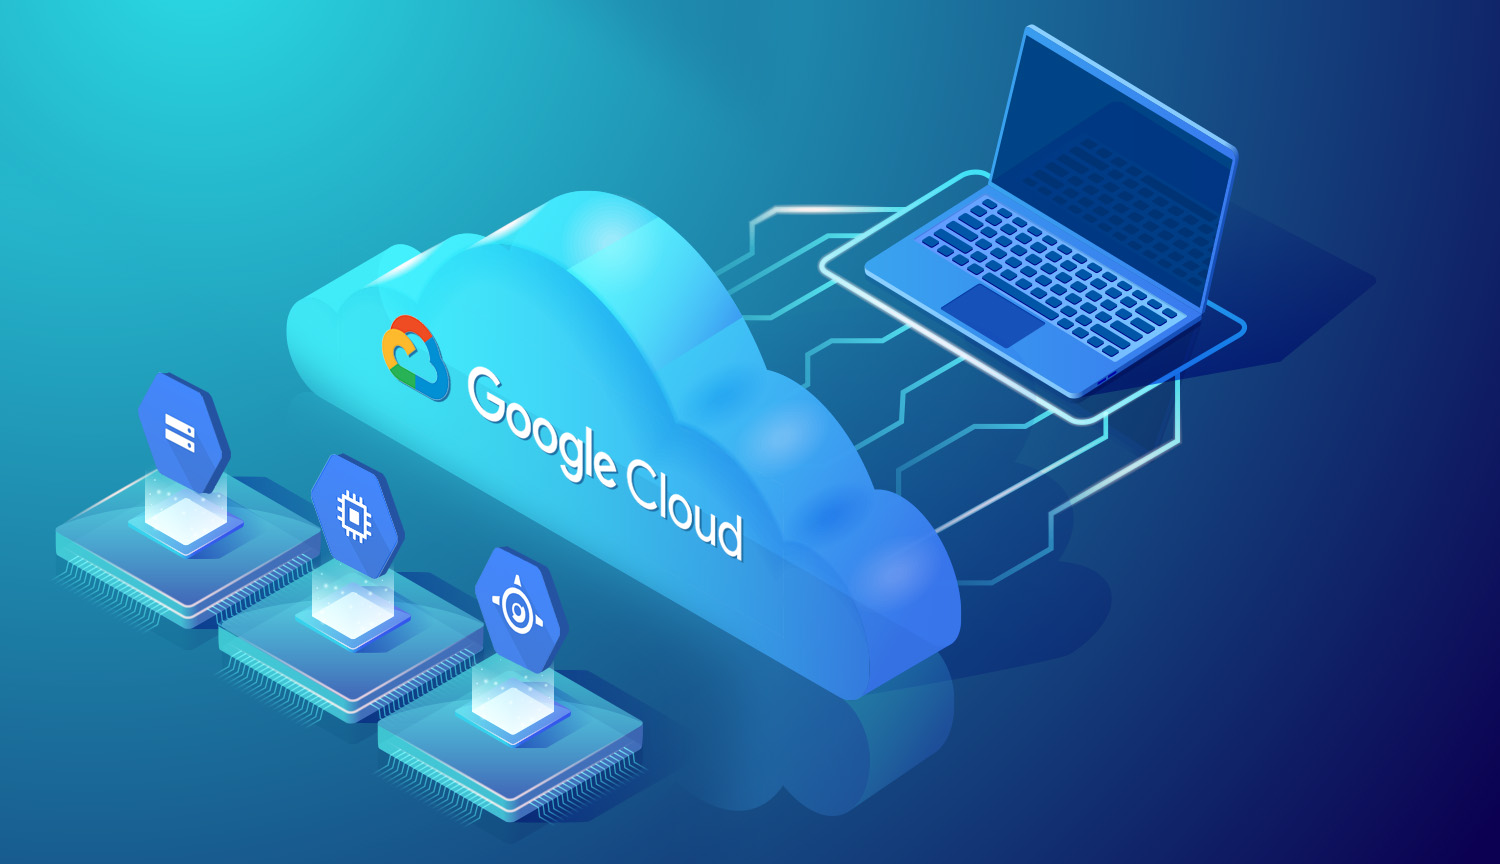 Client connecting to a Google Cloud Server